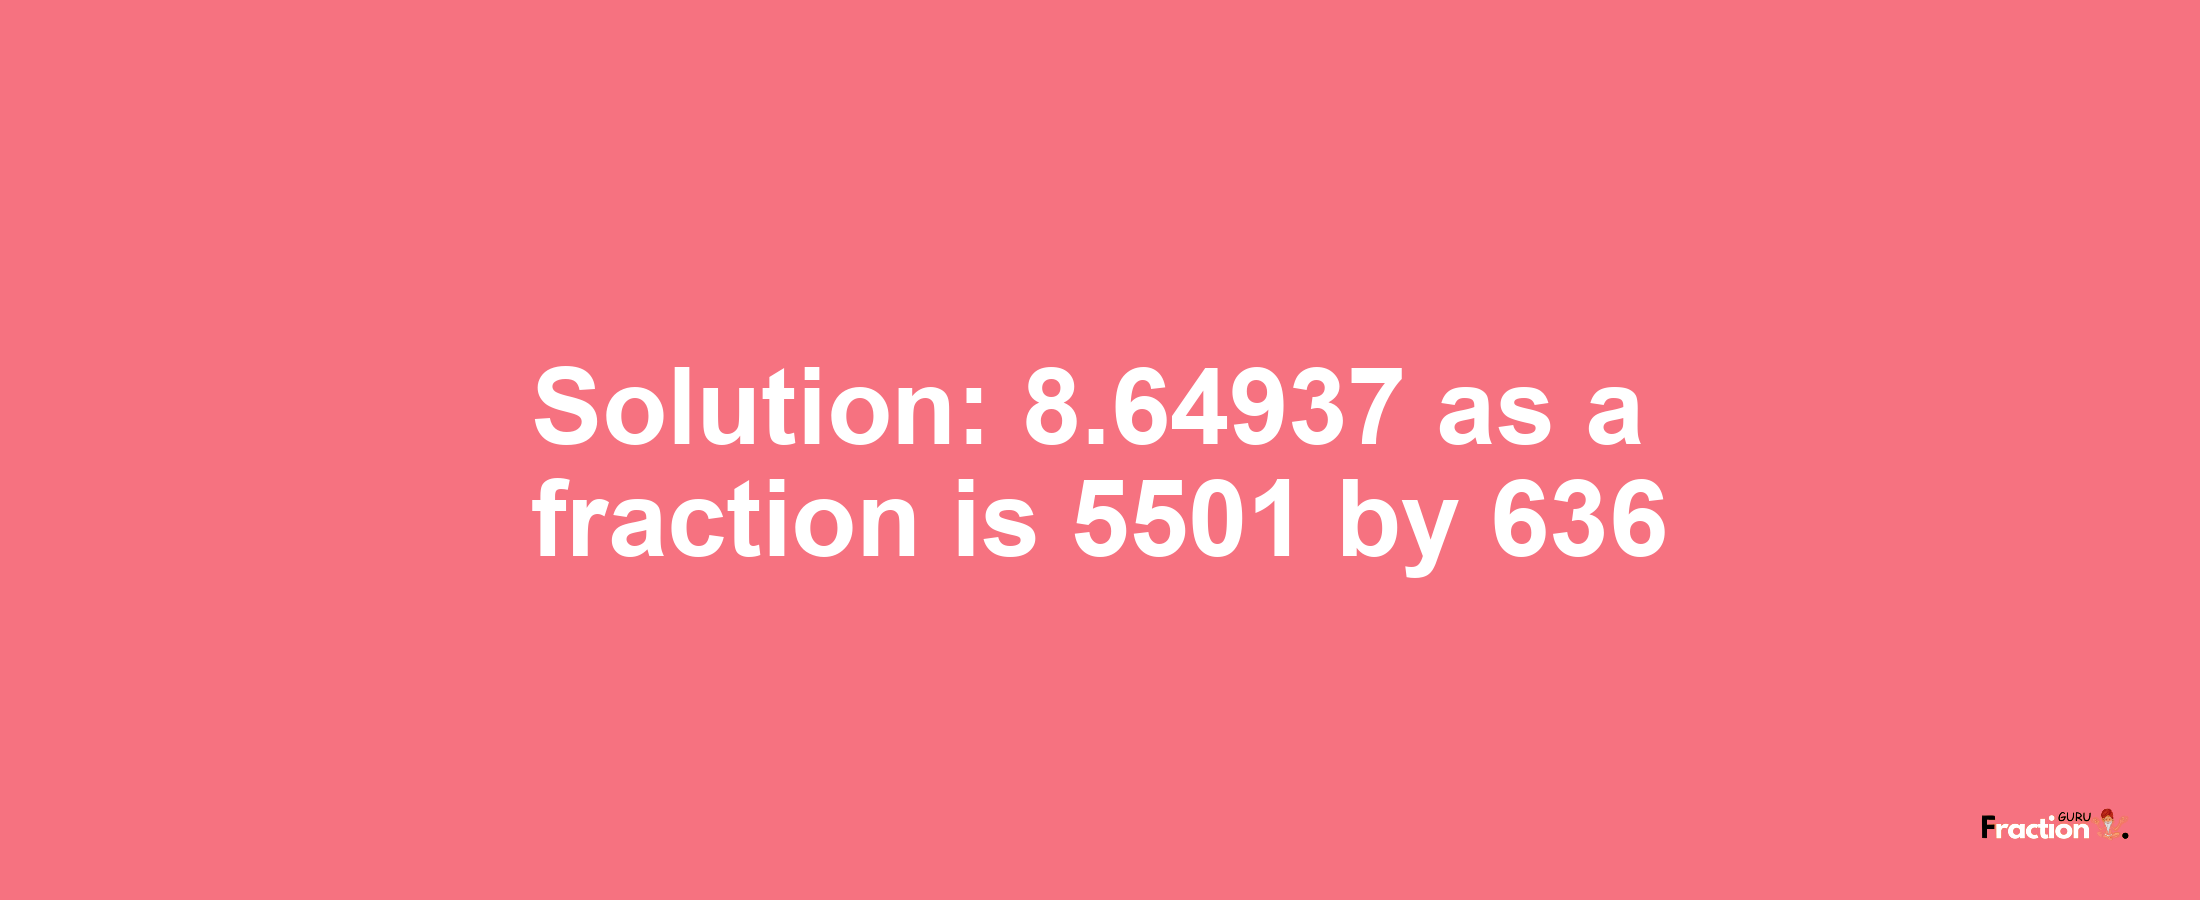 Solution:8.64937 as a fraction is 5501/636